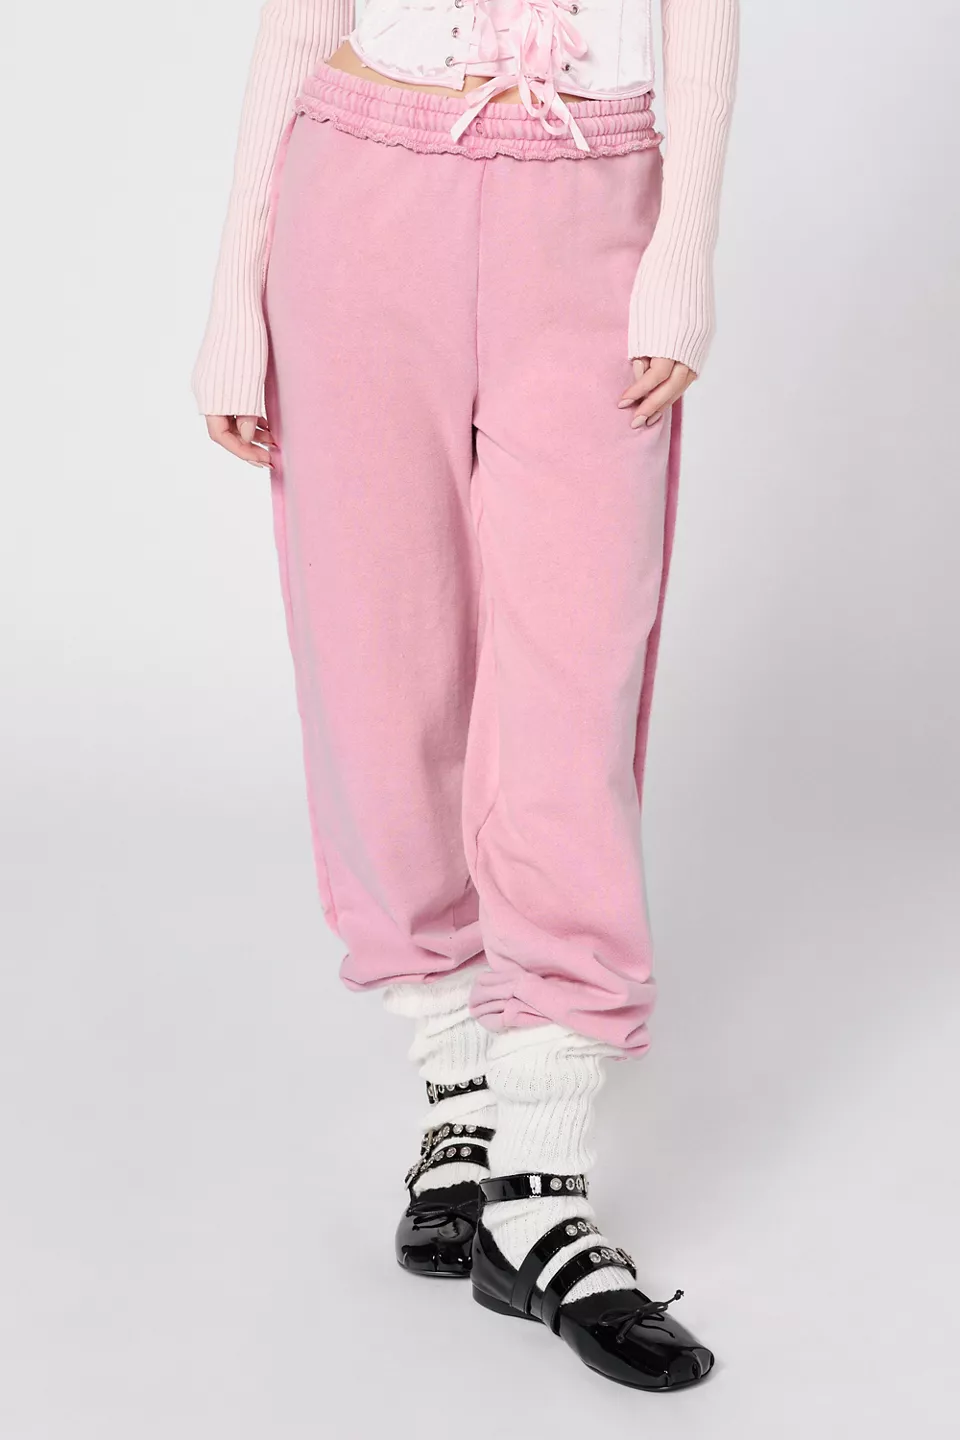 urbanoutfitters.com | Out From Under Rae Jogger Sweatpant